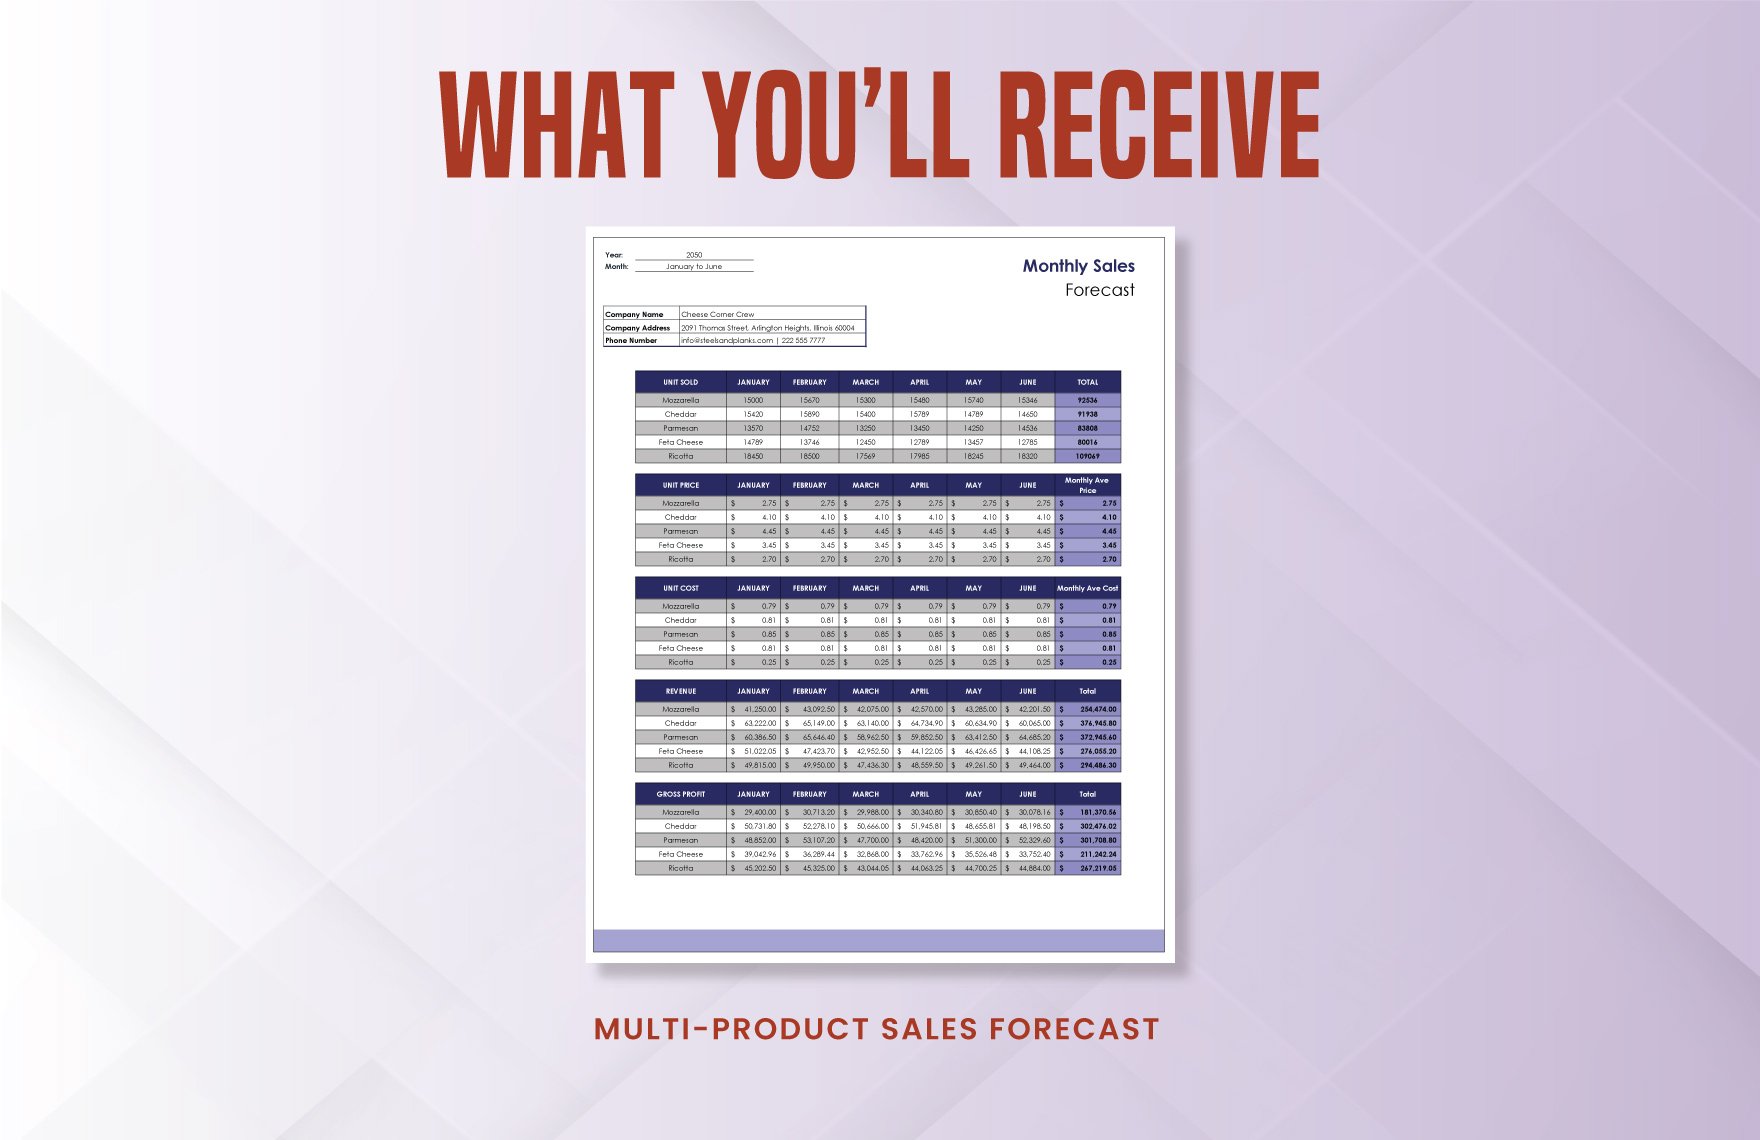 Multi-product Sales Forecast Template